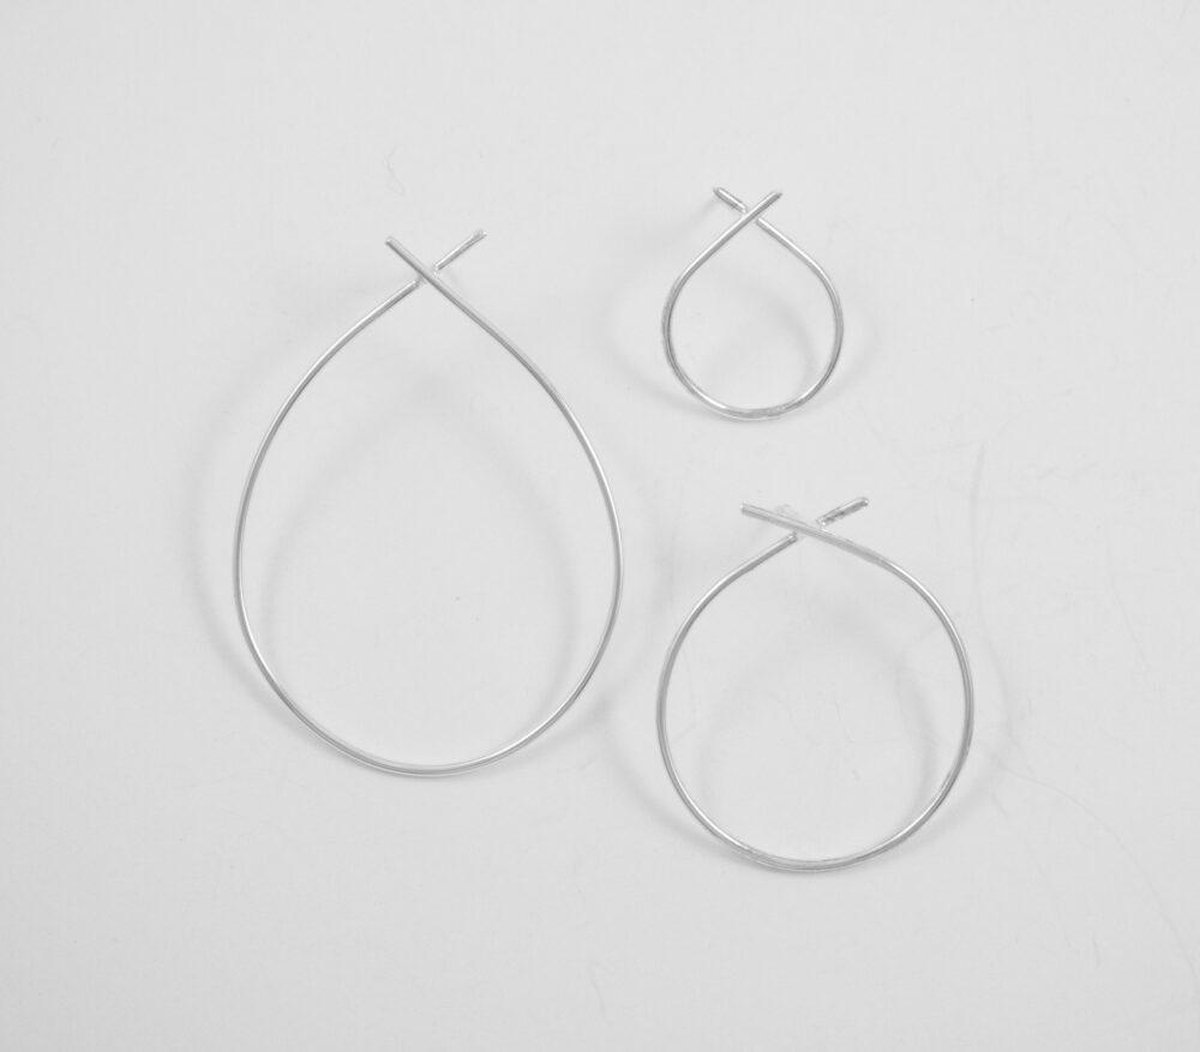 A relative size comparison of all three teardrop earrings: small, medium, and large.